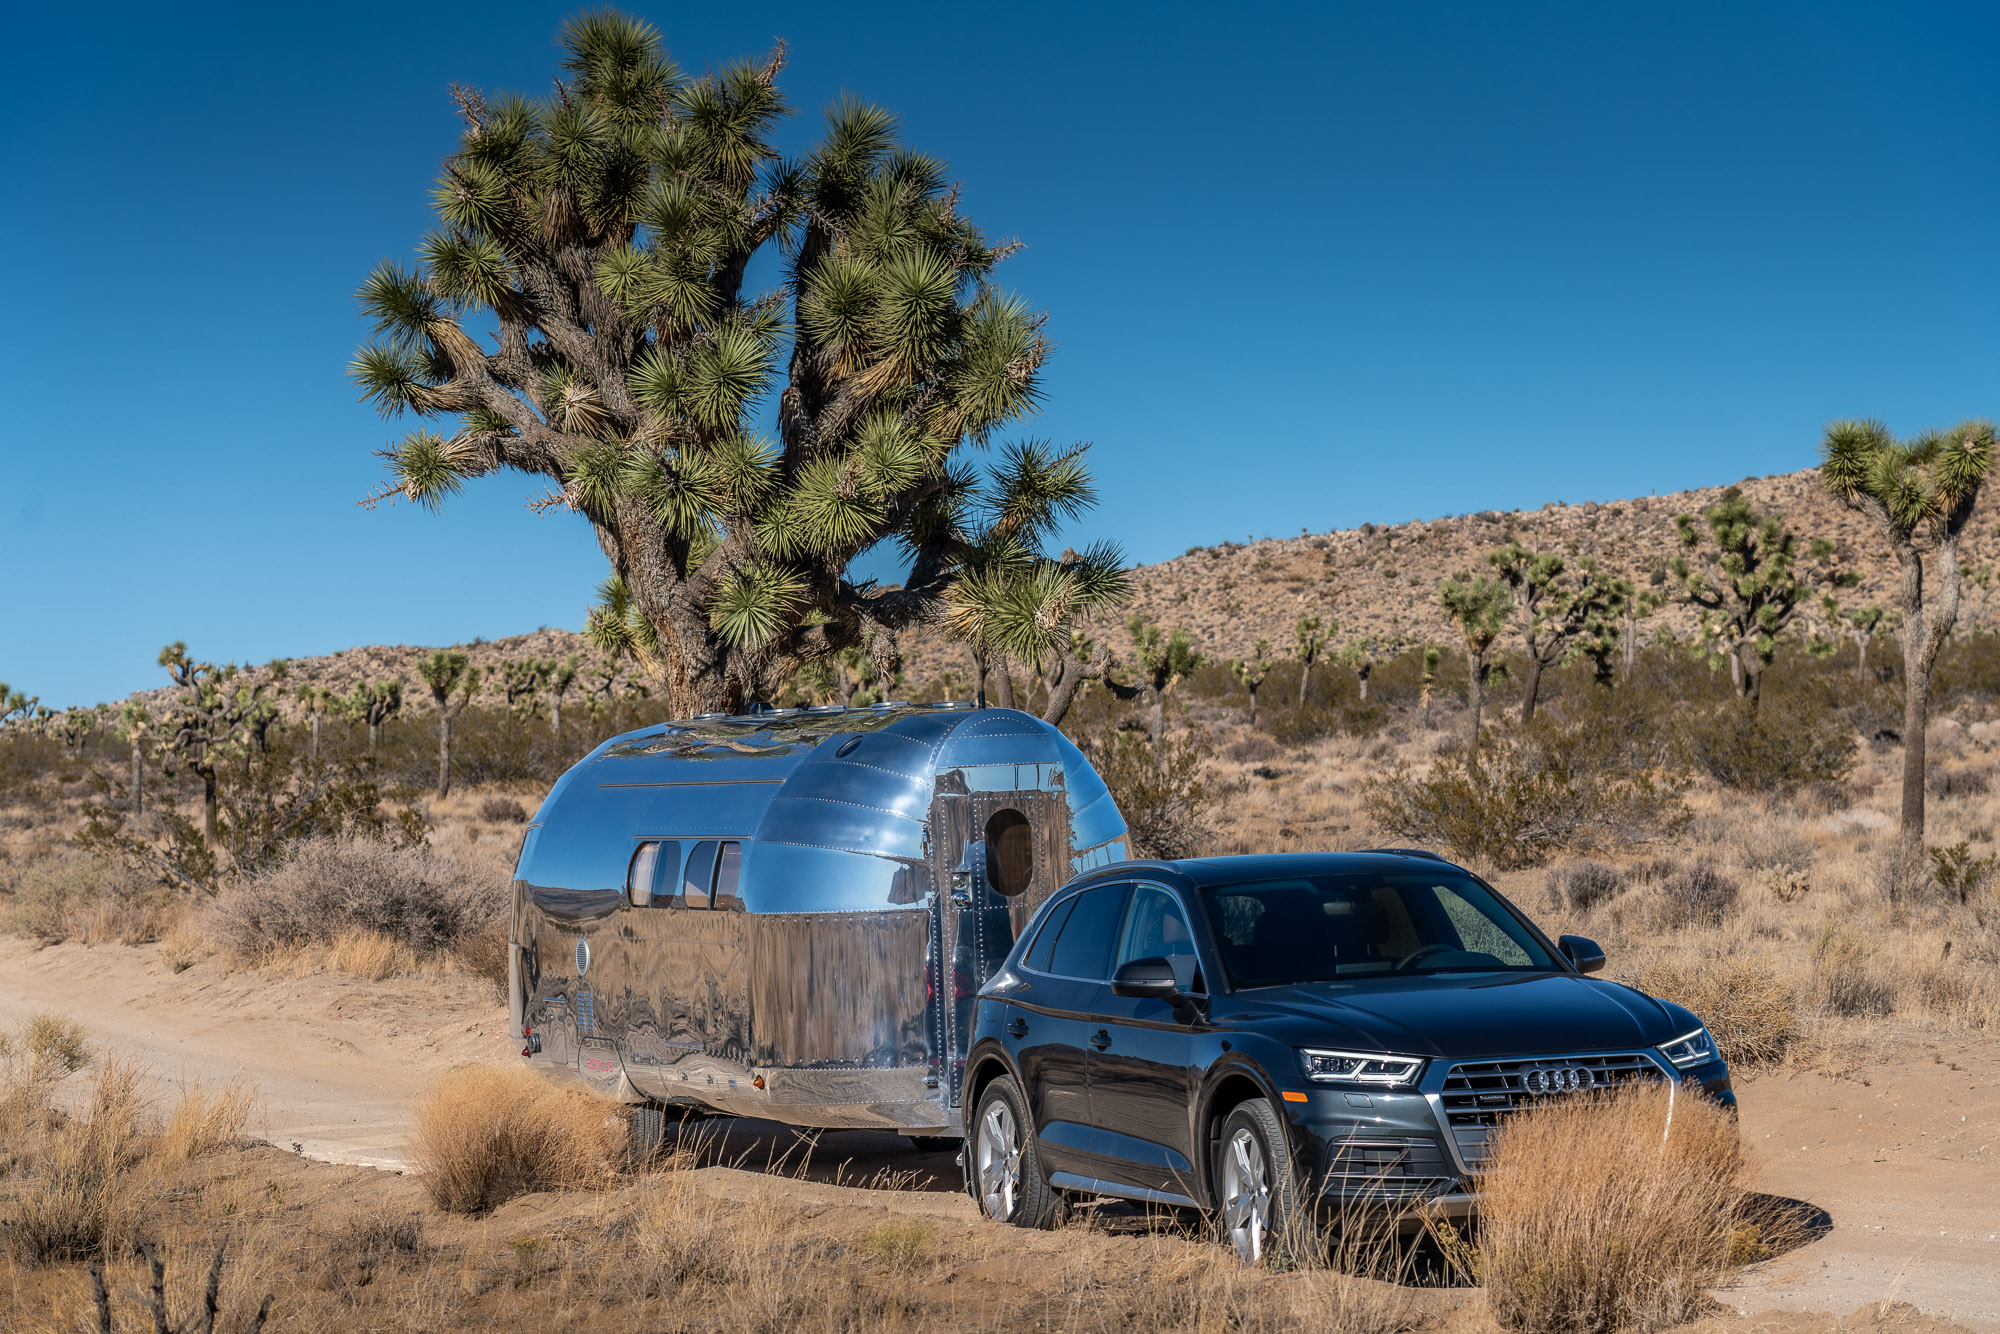 Bowlus is Built for Luxurious Off Grid Adventures